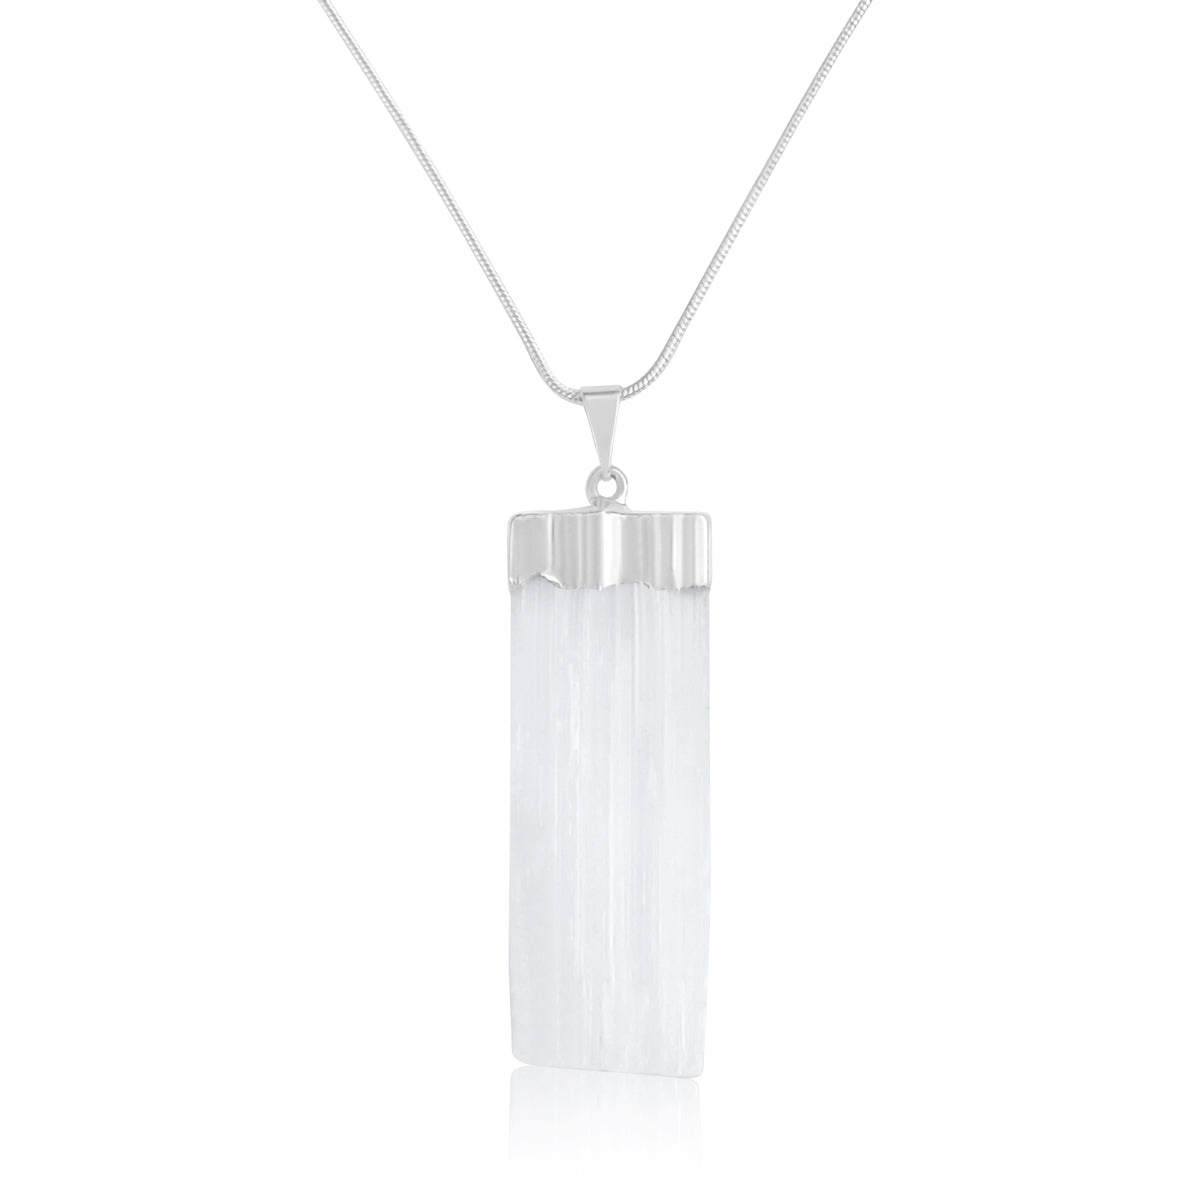 Pure potential refers to the unlimited possibilities and opportunities that exist within an individual, or in a situation, before any specific choices or actions are taken. This Pure Potential Necklace helps remove mental and emotional blocks,  clears the mind and aura, and remove any obstacles.